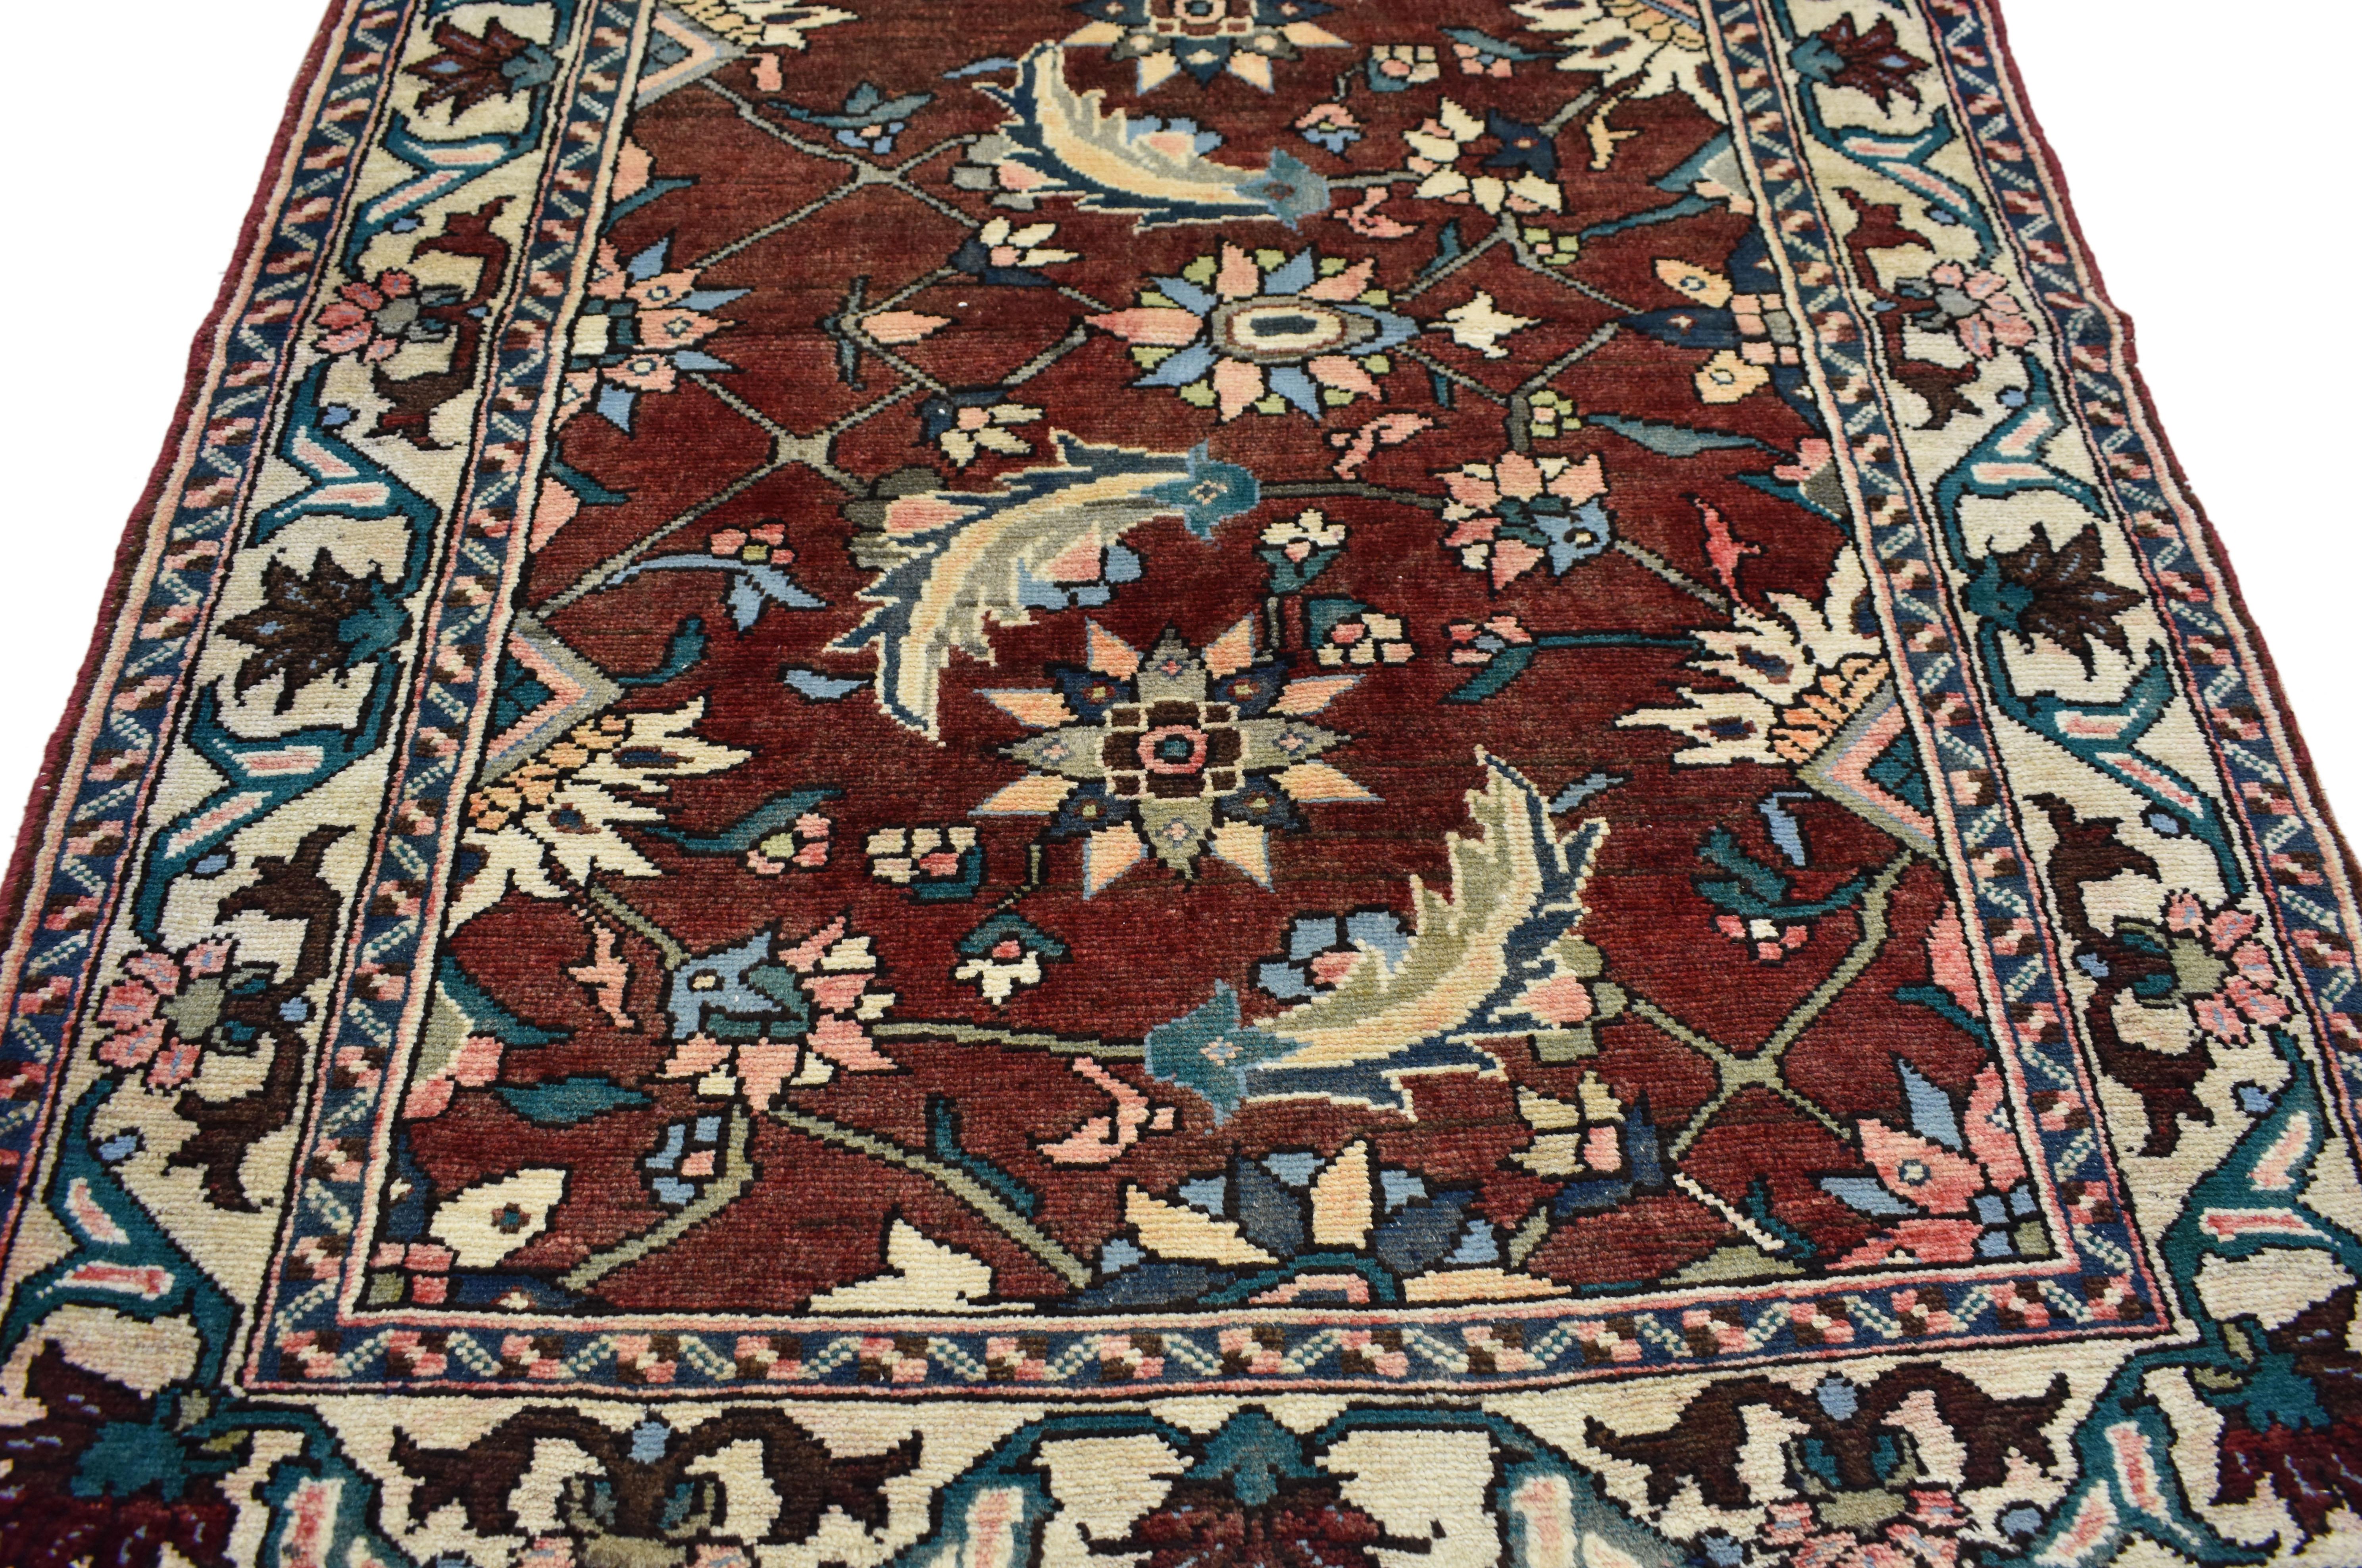 75262 Vintage Persian Bakhtiari Runner, Hallway Runner 03'07 X 09'07. This hand-knotted wool vintage Persian Bakhtiari runner features a large-scale Herati pattern composed of serrated leaves, feathers, blooming palmettes and louts blossoms floating